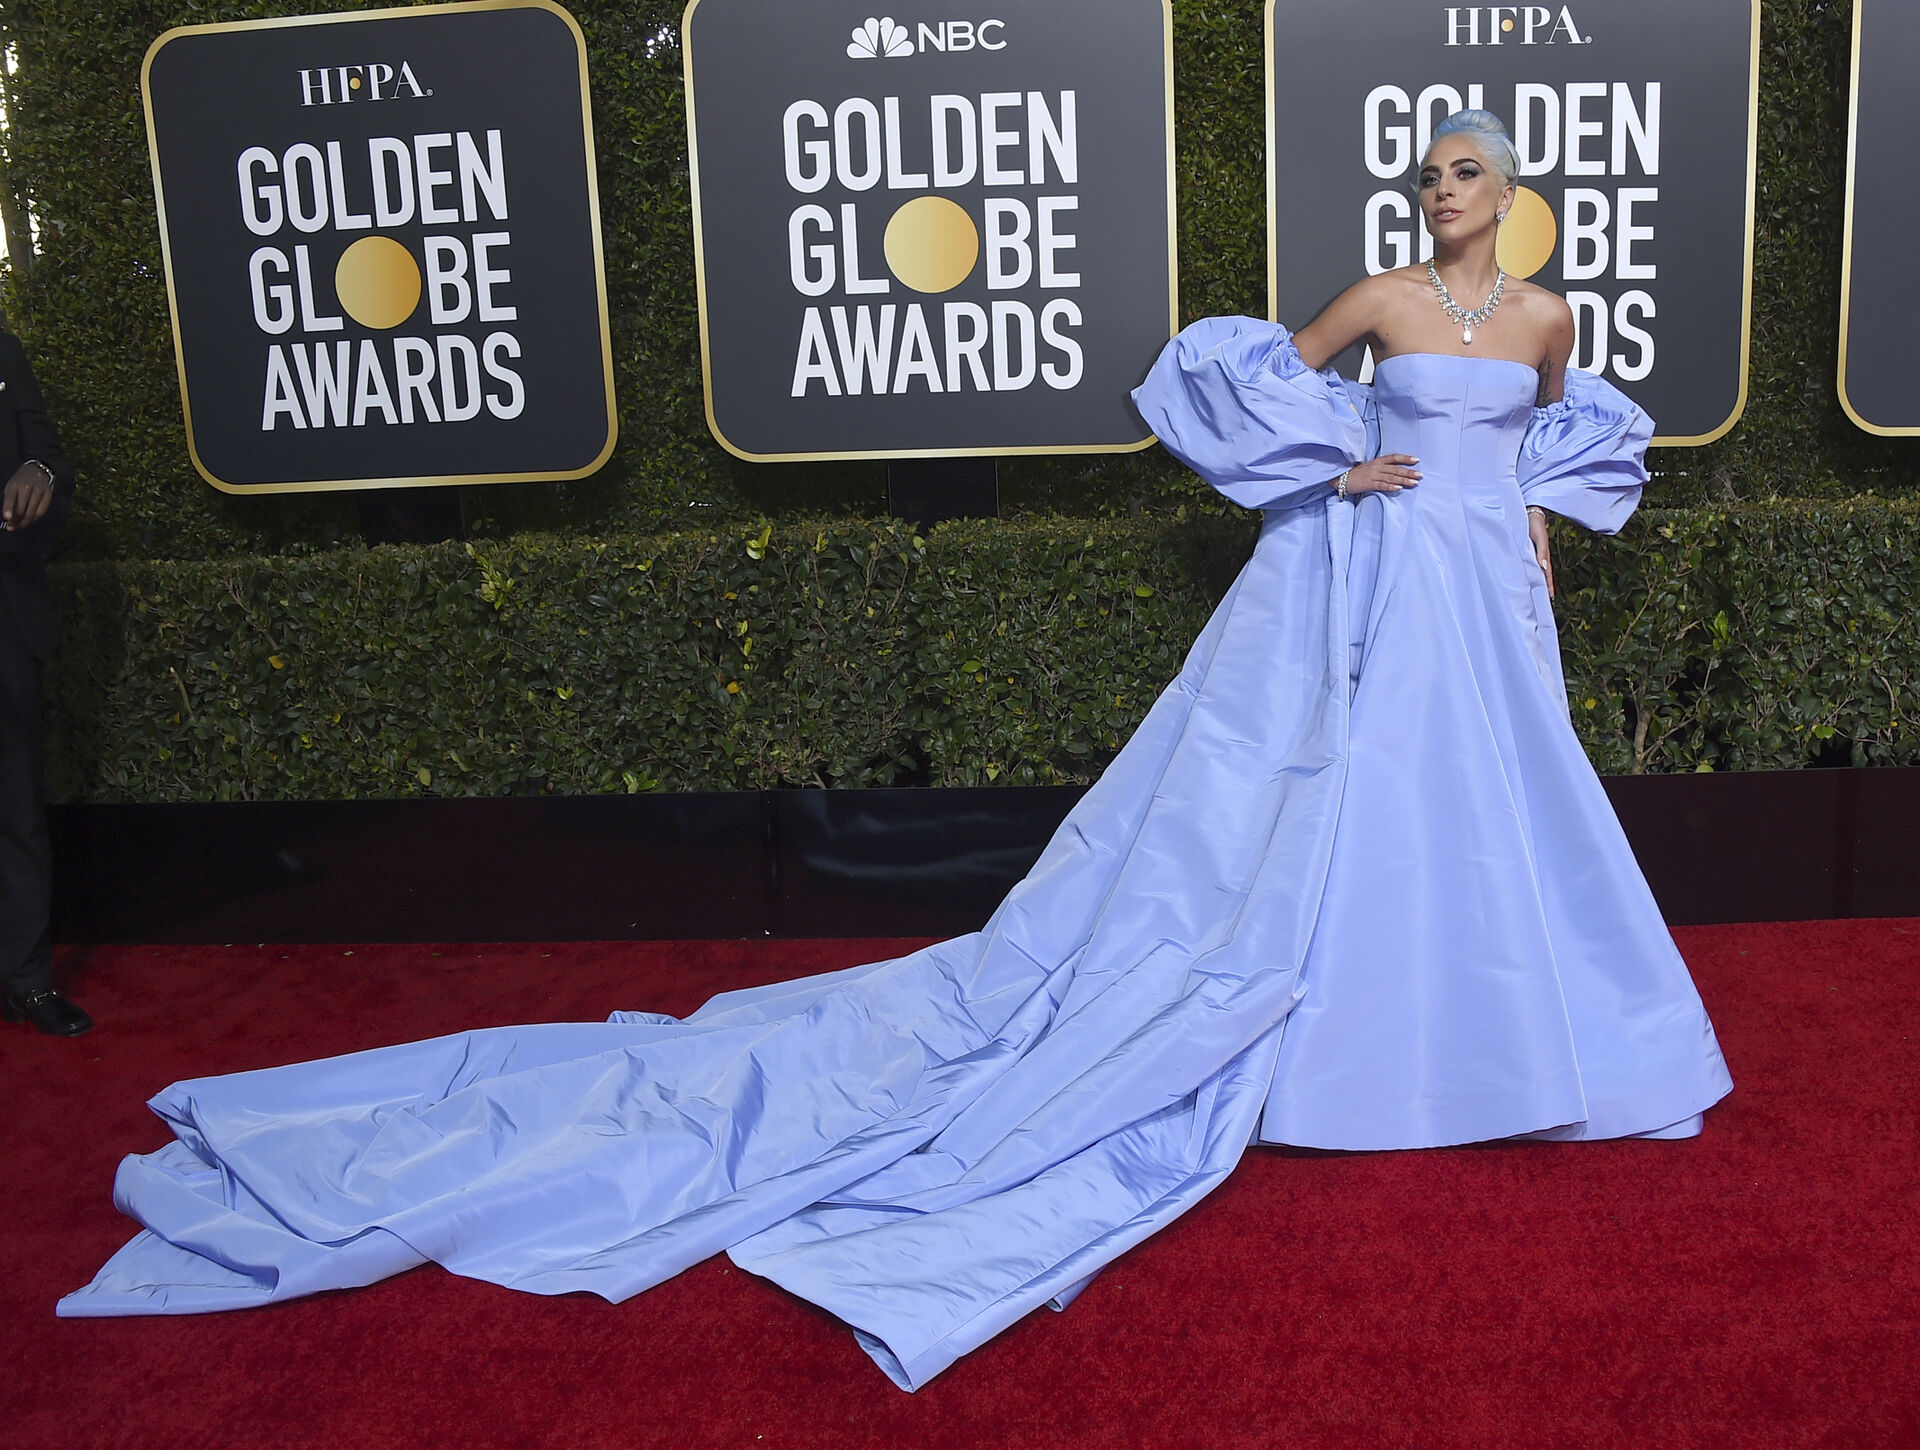 Lady Gaga arrives at the 76th annual Golden Globe Awards at the Beverly Hilton Hotel on Sunday, Jan. 6, 2019, in Beverly Hills, Calif. (Photo by Jordan Strauss/Invision/AP)